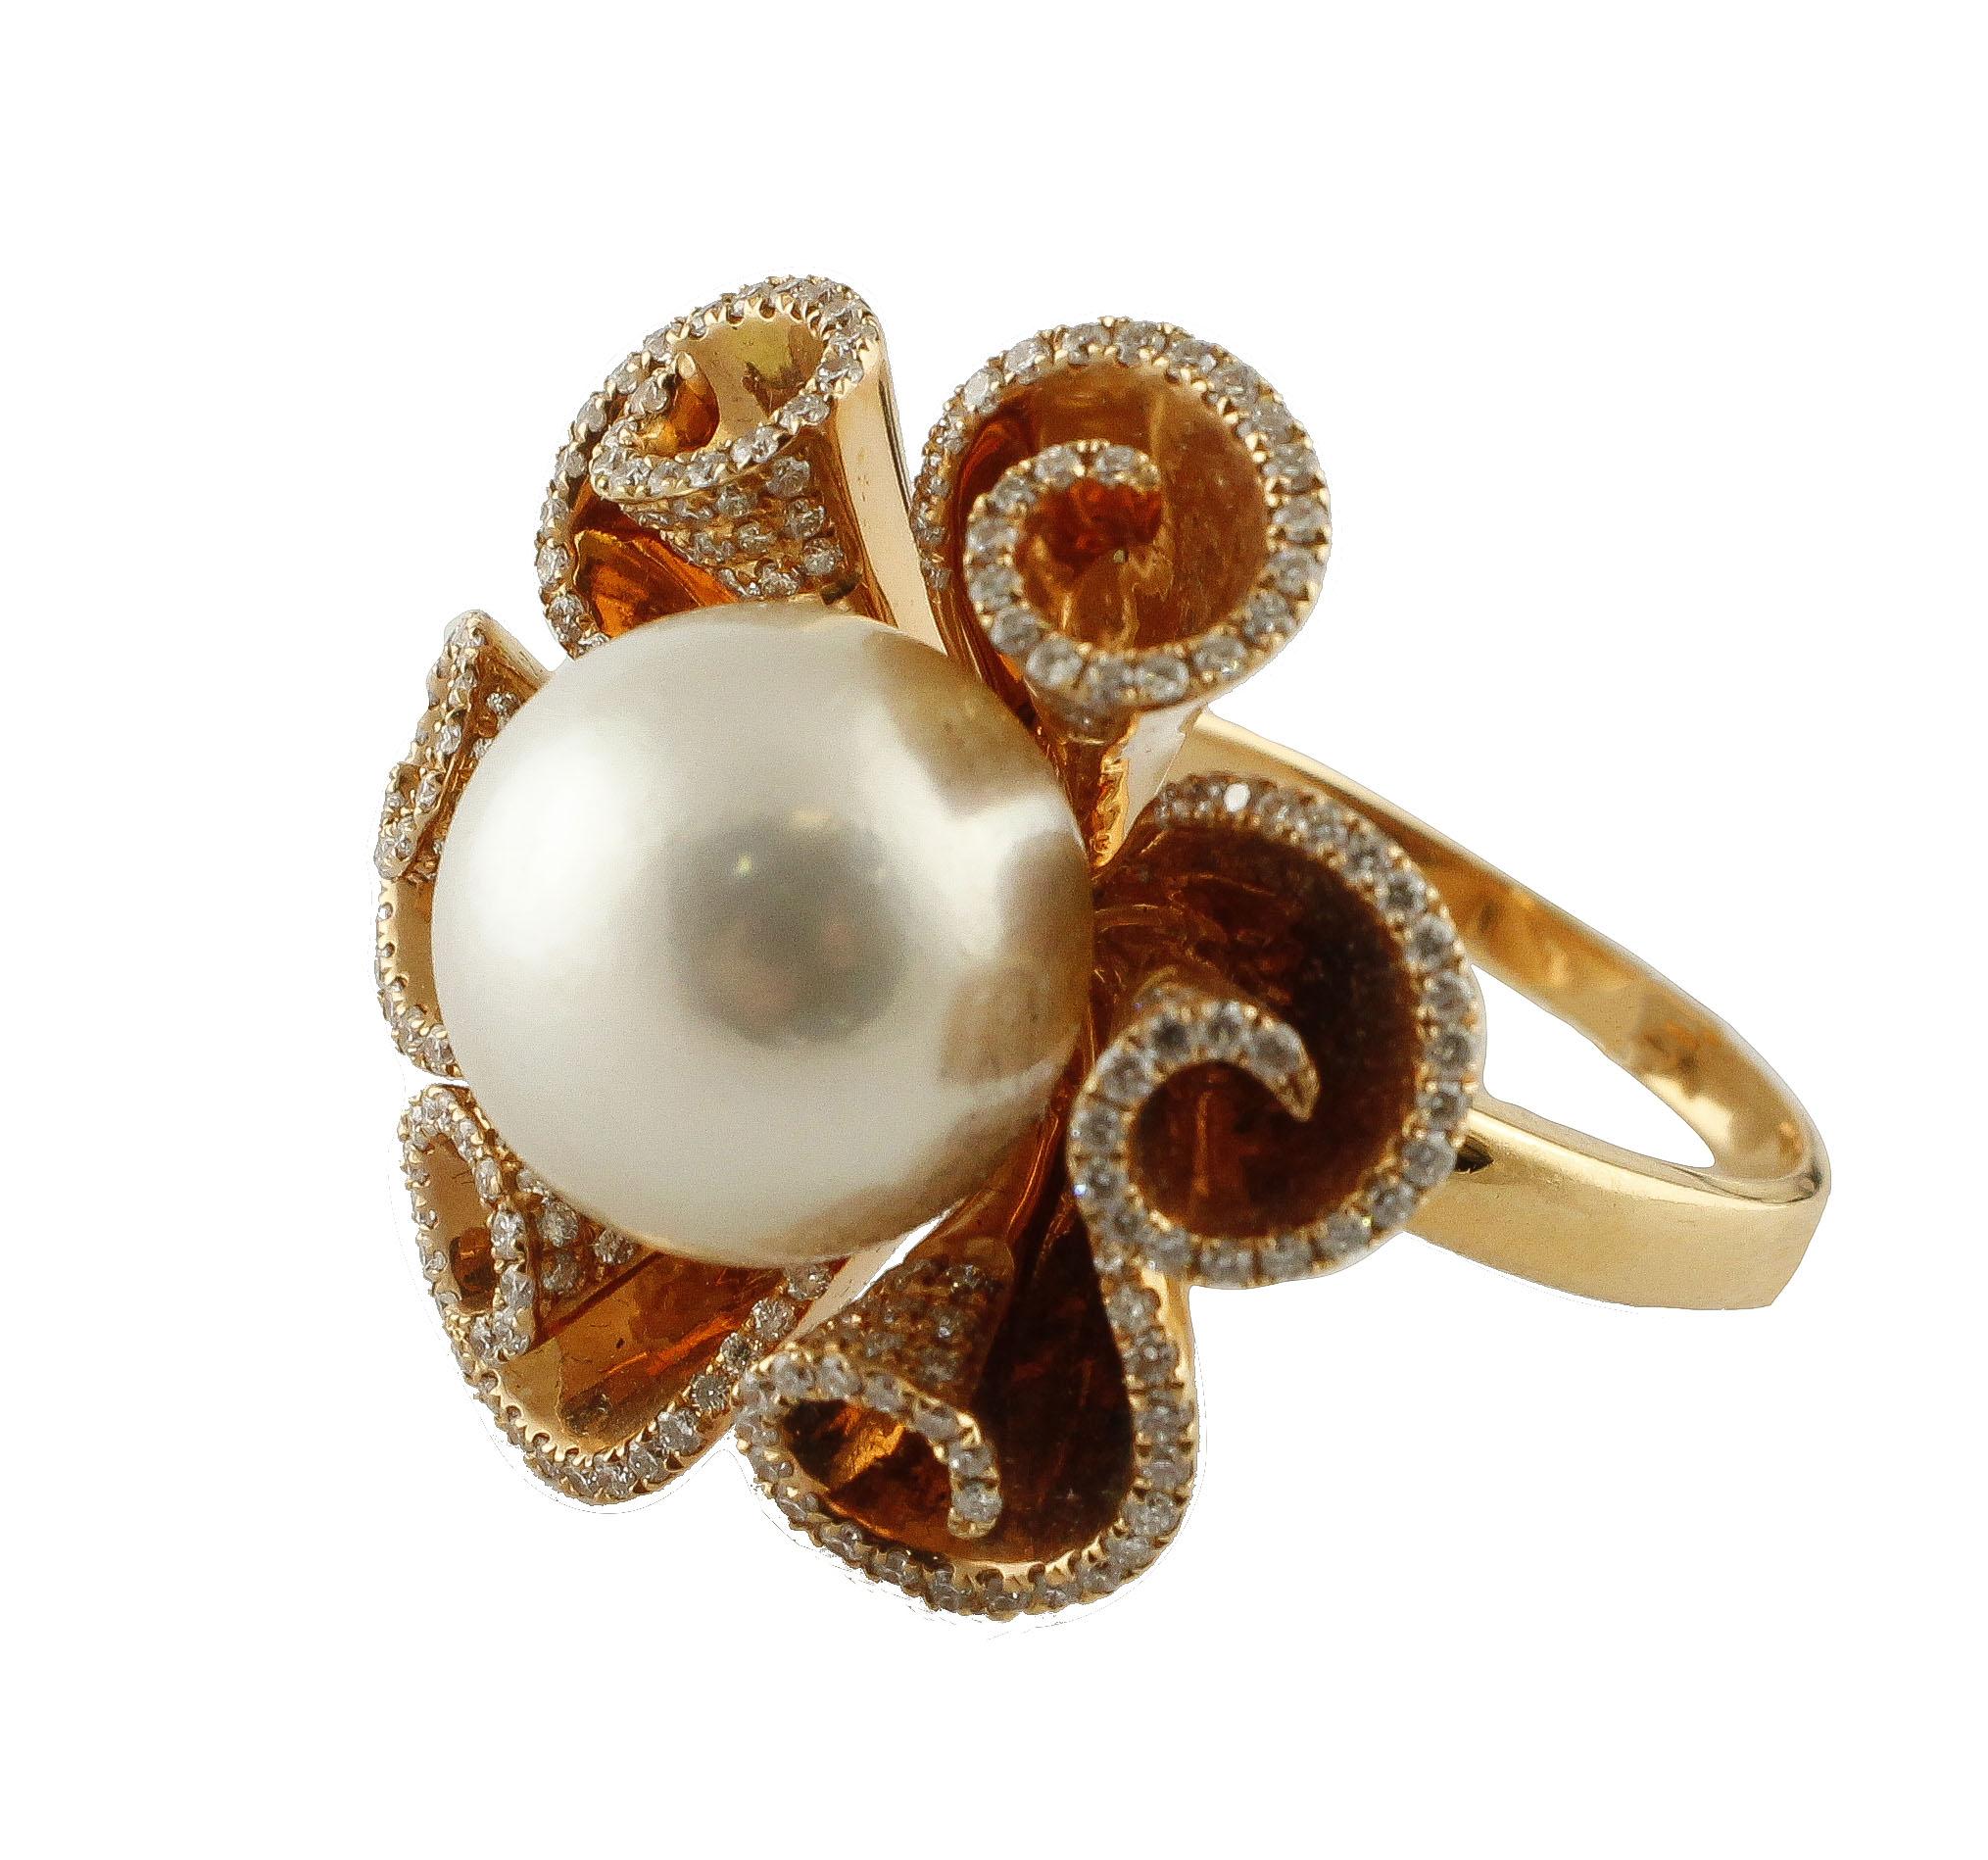 Stylized flower shaped ring in 18kt yellow gold composed of a central pearl surrounded by petals covered in diamonds.

diamonds 0.88kt
pearl 12mm/0,47inch
tot weight 13.3gr
r.f.  hgfi

We hereby inform our customers that in the case of return they